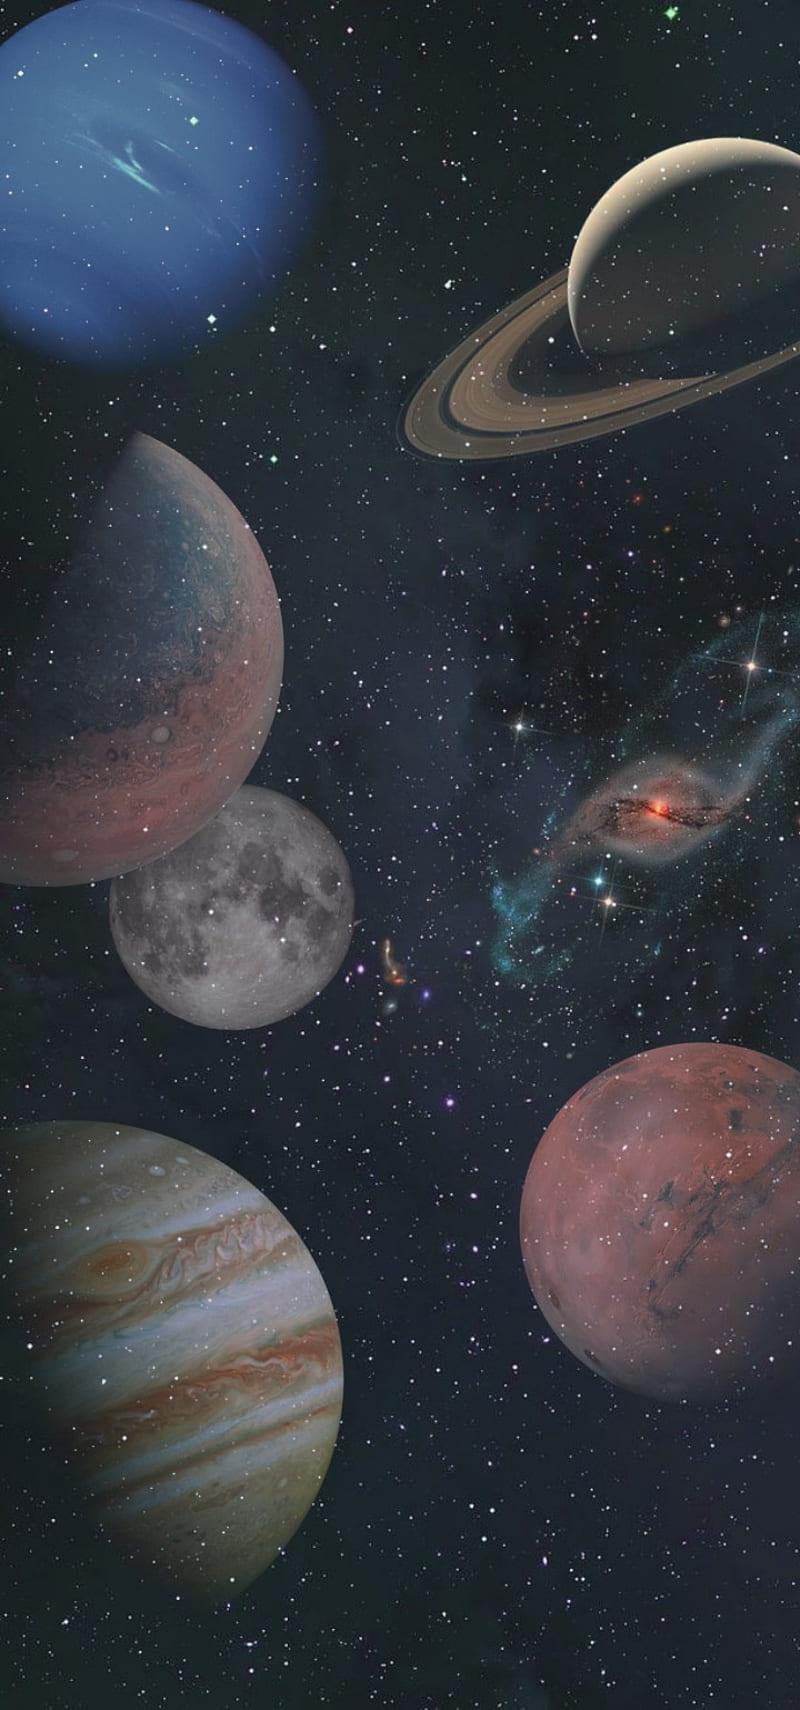 A group of planets in space with stars - Earth, planet, Saturn, Mars, stars